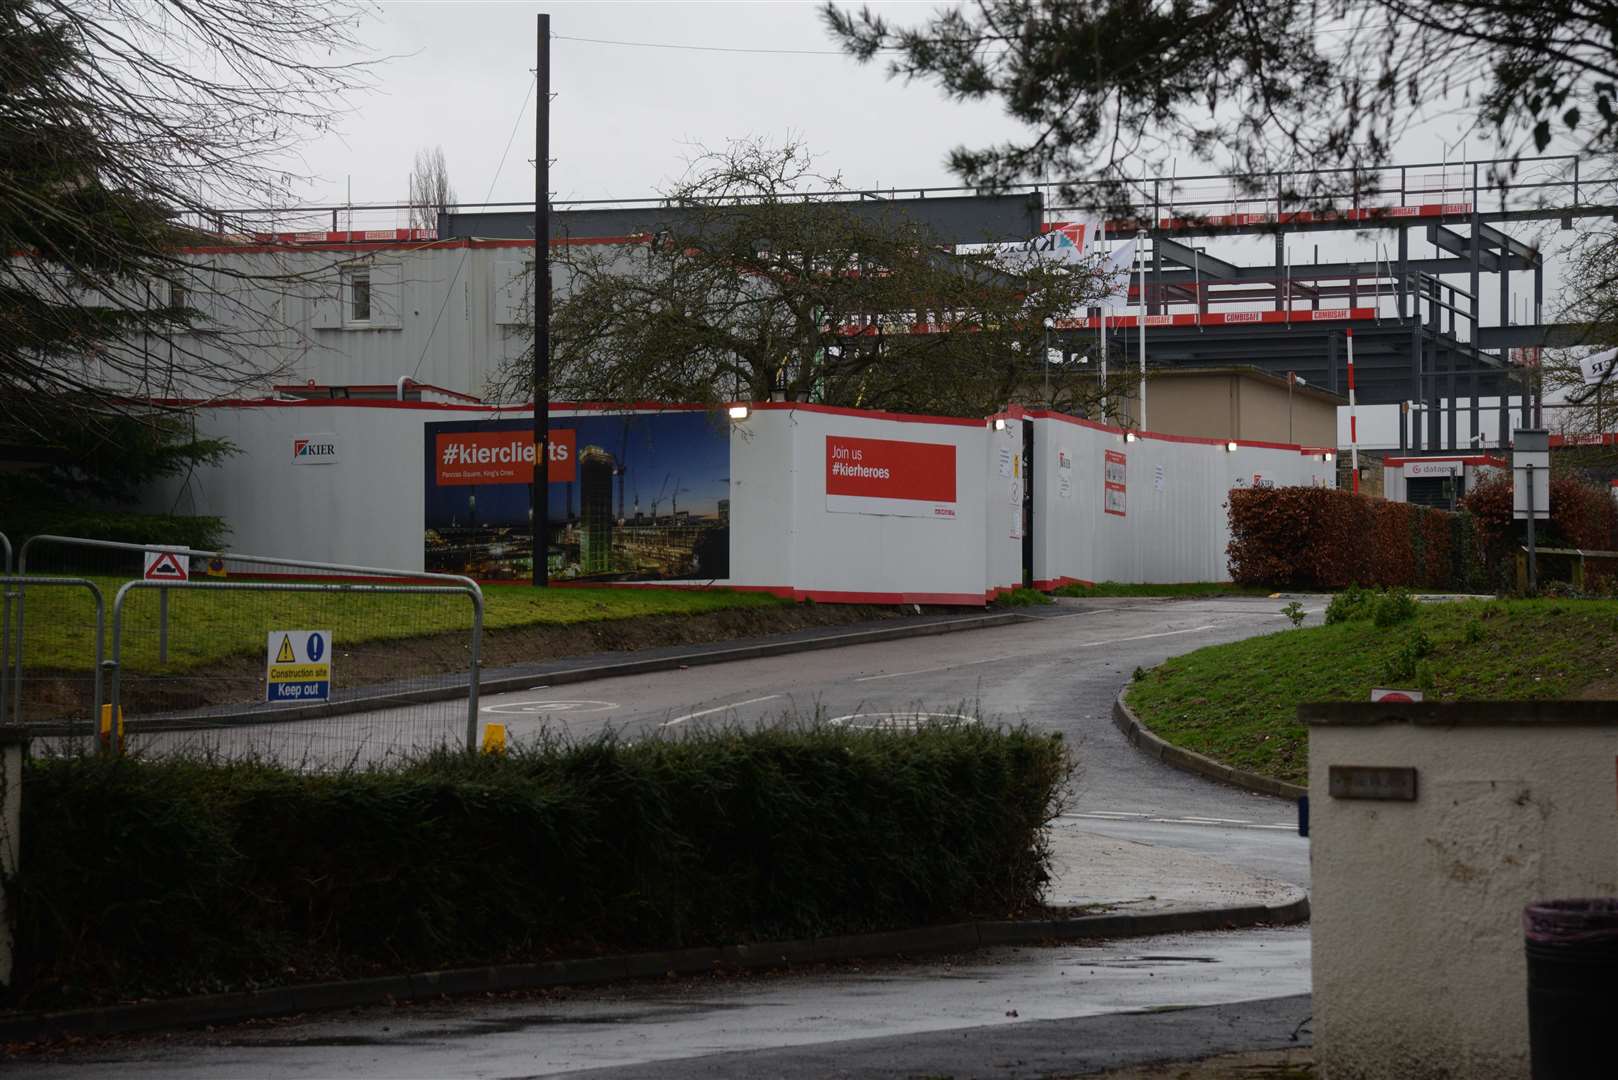 The new-build at the school has been progressing throughout the year. The old school will be demolished after its completion